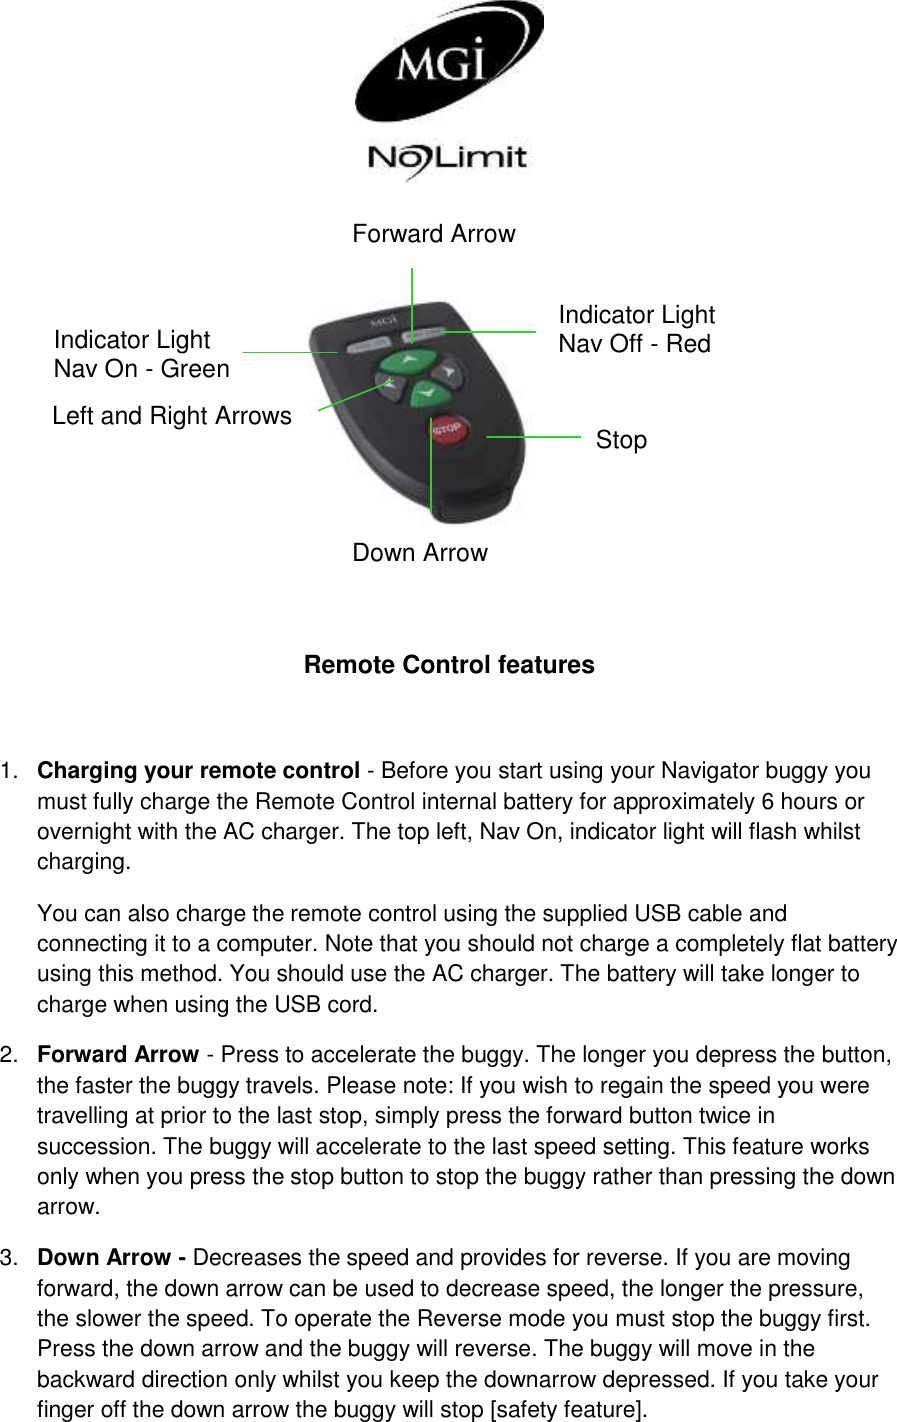      Remote Control features  1. Charging your remote control - Before you start using your Navigator buggy you must fully charge the Remote Control internal battery for approximately 6 hours or overnight with the AC charger. The top left, Nav On, indicator light will flash whilst charging.  You can also charge the remote control using the supplied USB cable and connecting it to a computer. Note that you should not charge a completely flat battery using this method. You should use the AC charger. The battery will take longer to charge when using the USB cord. 2. Forward Arrow - Press to accelerate the buggy. The longer you depress the button, the faster the buggy travels. Please note: If you wish to regain the speed you were travelling at prior to the last stop, simply press the forward button twice in succession. The buggy will accelerate to the last speed setting. This feature works only when you press the stop button to stop the buggy rather than pressing the down arrow. 3. Down Arrow - Decreases the speed and provides for reverse. If you are moving forward, the down arrow can be used to decrease speed, the longer the pressure, the slower the speed. To operate the Reverse mode you must stop the buggy first. Press the down arrow and the buggy will reverse. The buggy will move in the backward direction only whilst you keep the downarrow depressed. If you take your finger off the down arrow the buggy will stop [safety feature]. Forward Arrow Down Arrow Left and Right Arrows Indicator Light  Nav On - Green Stop Indicator Light Nav Off - Red 